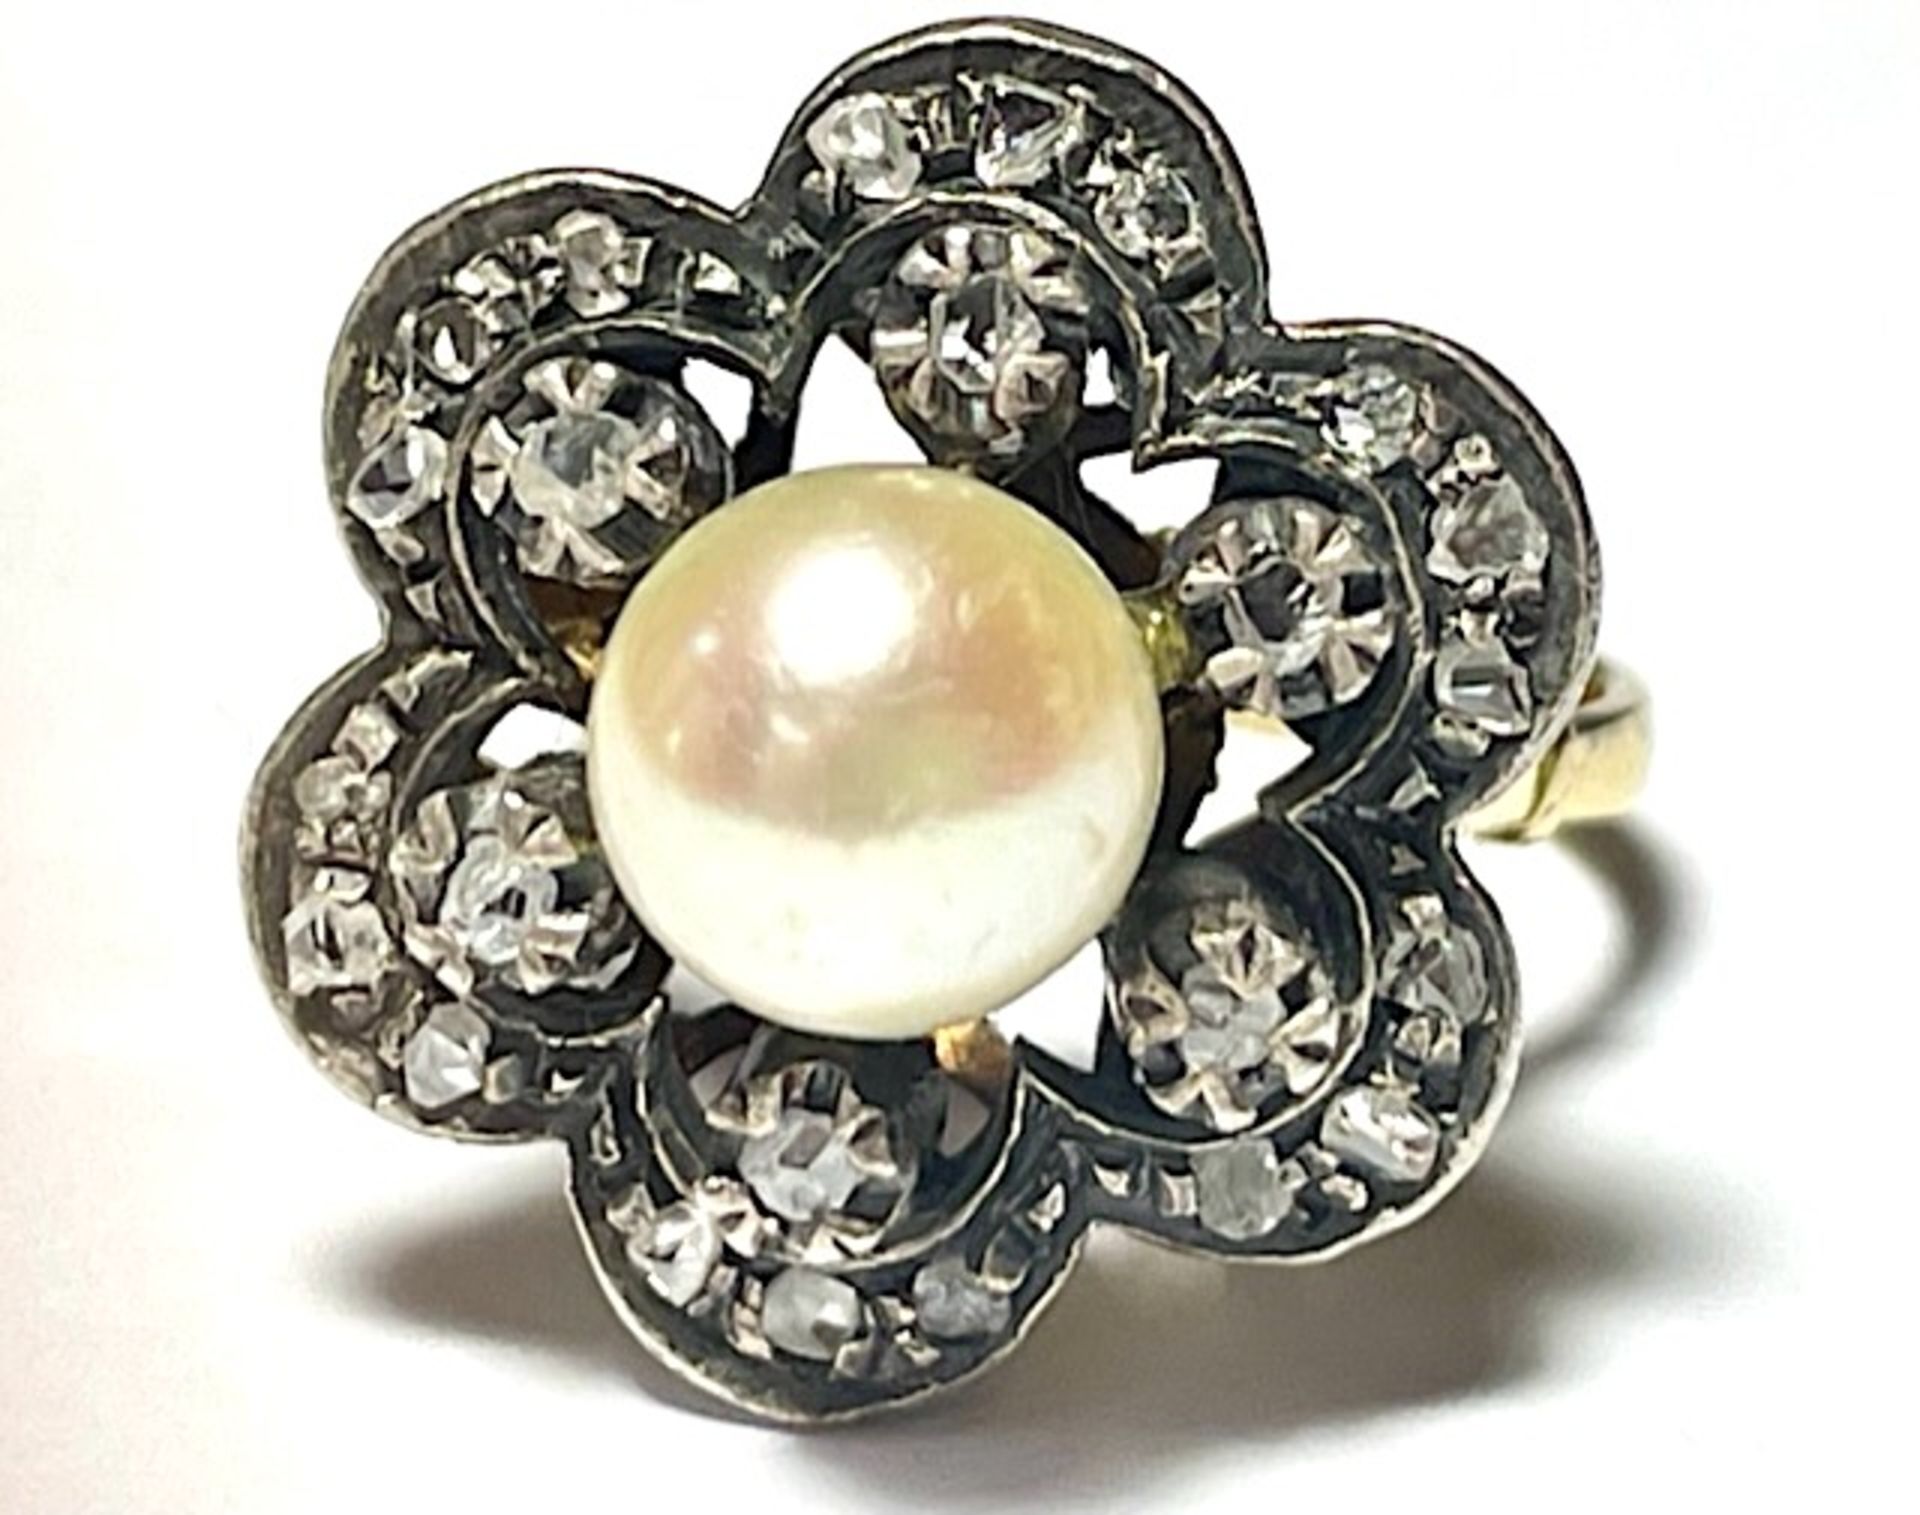 Antique pearl ring - Image 12 of 12